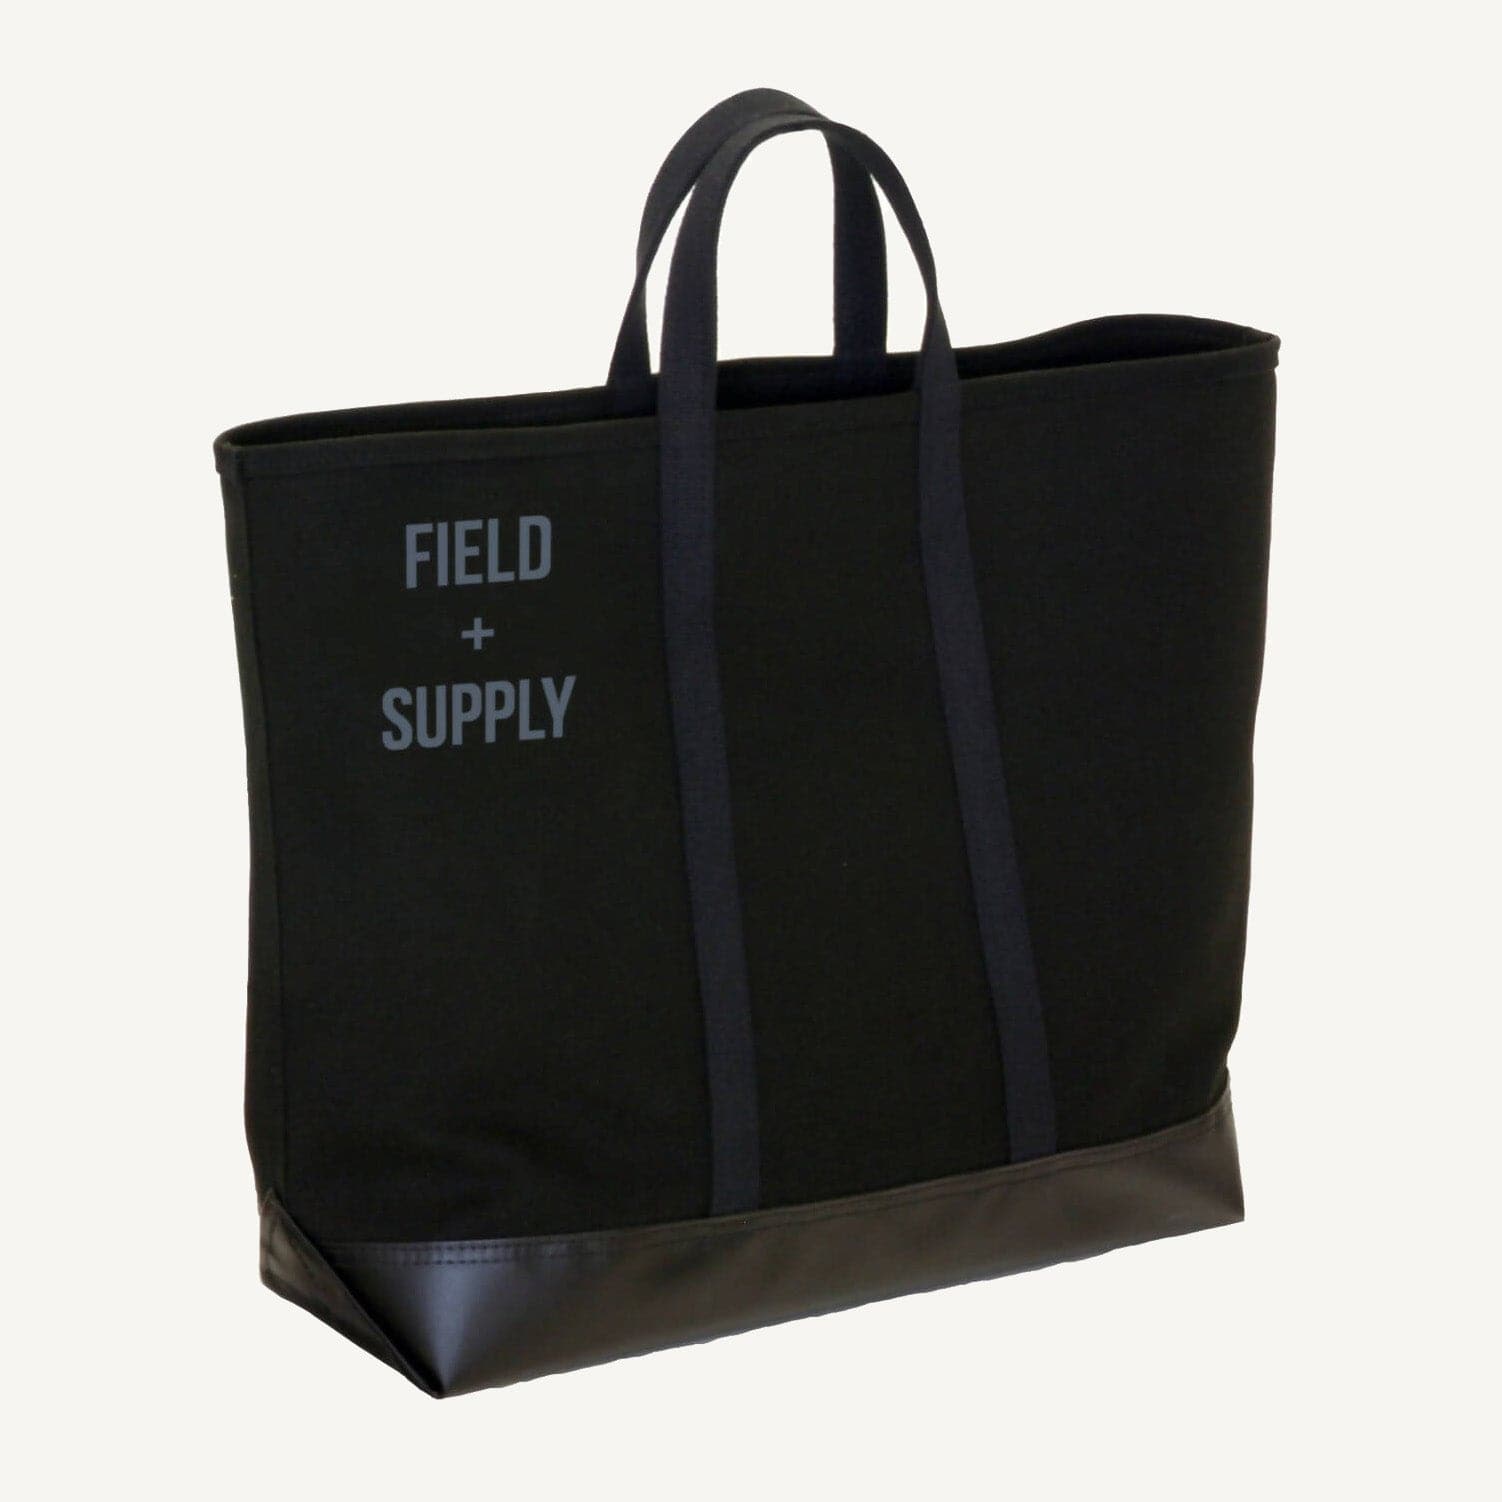 F+S Large Canvas Tote Bag – FIELD + SUPPLY